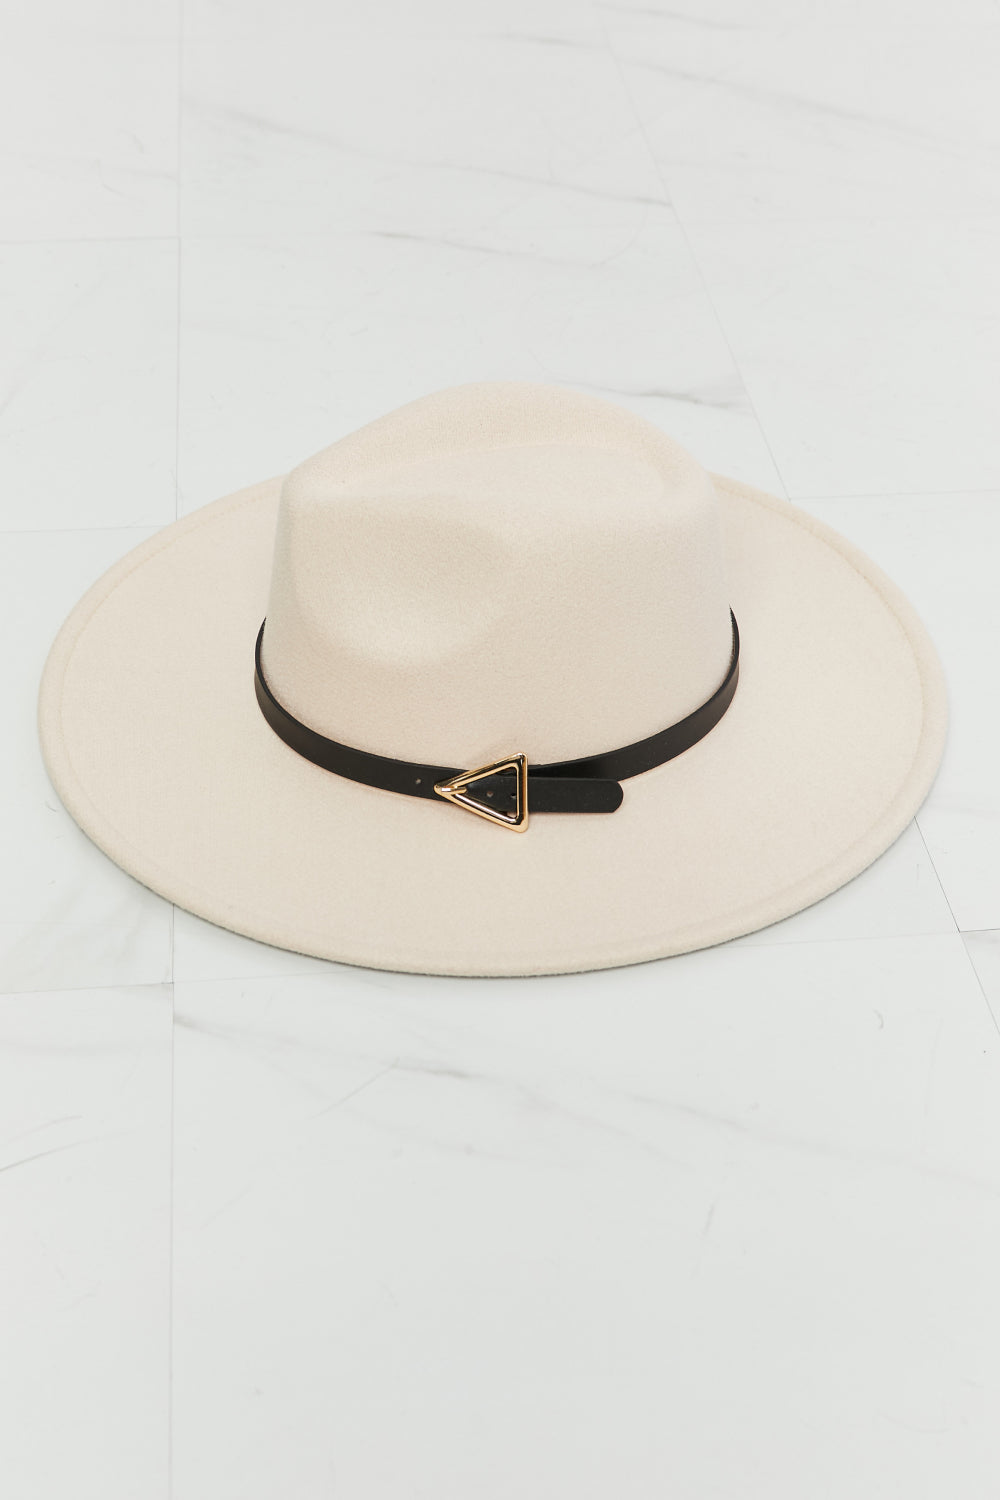 - Fame Ride Along Fedora Hat - Ships from The USA - Hat at TFC&H Co.